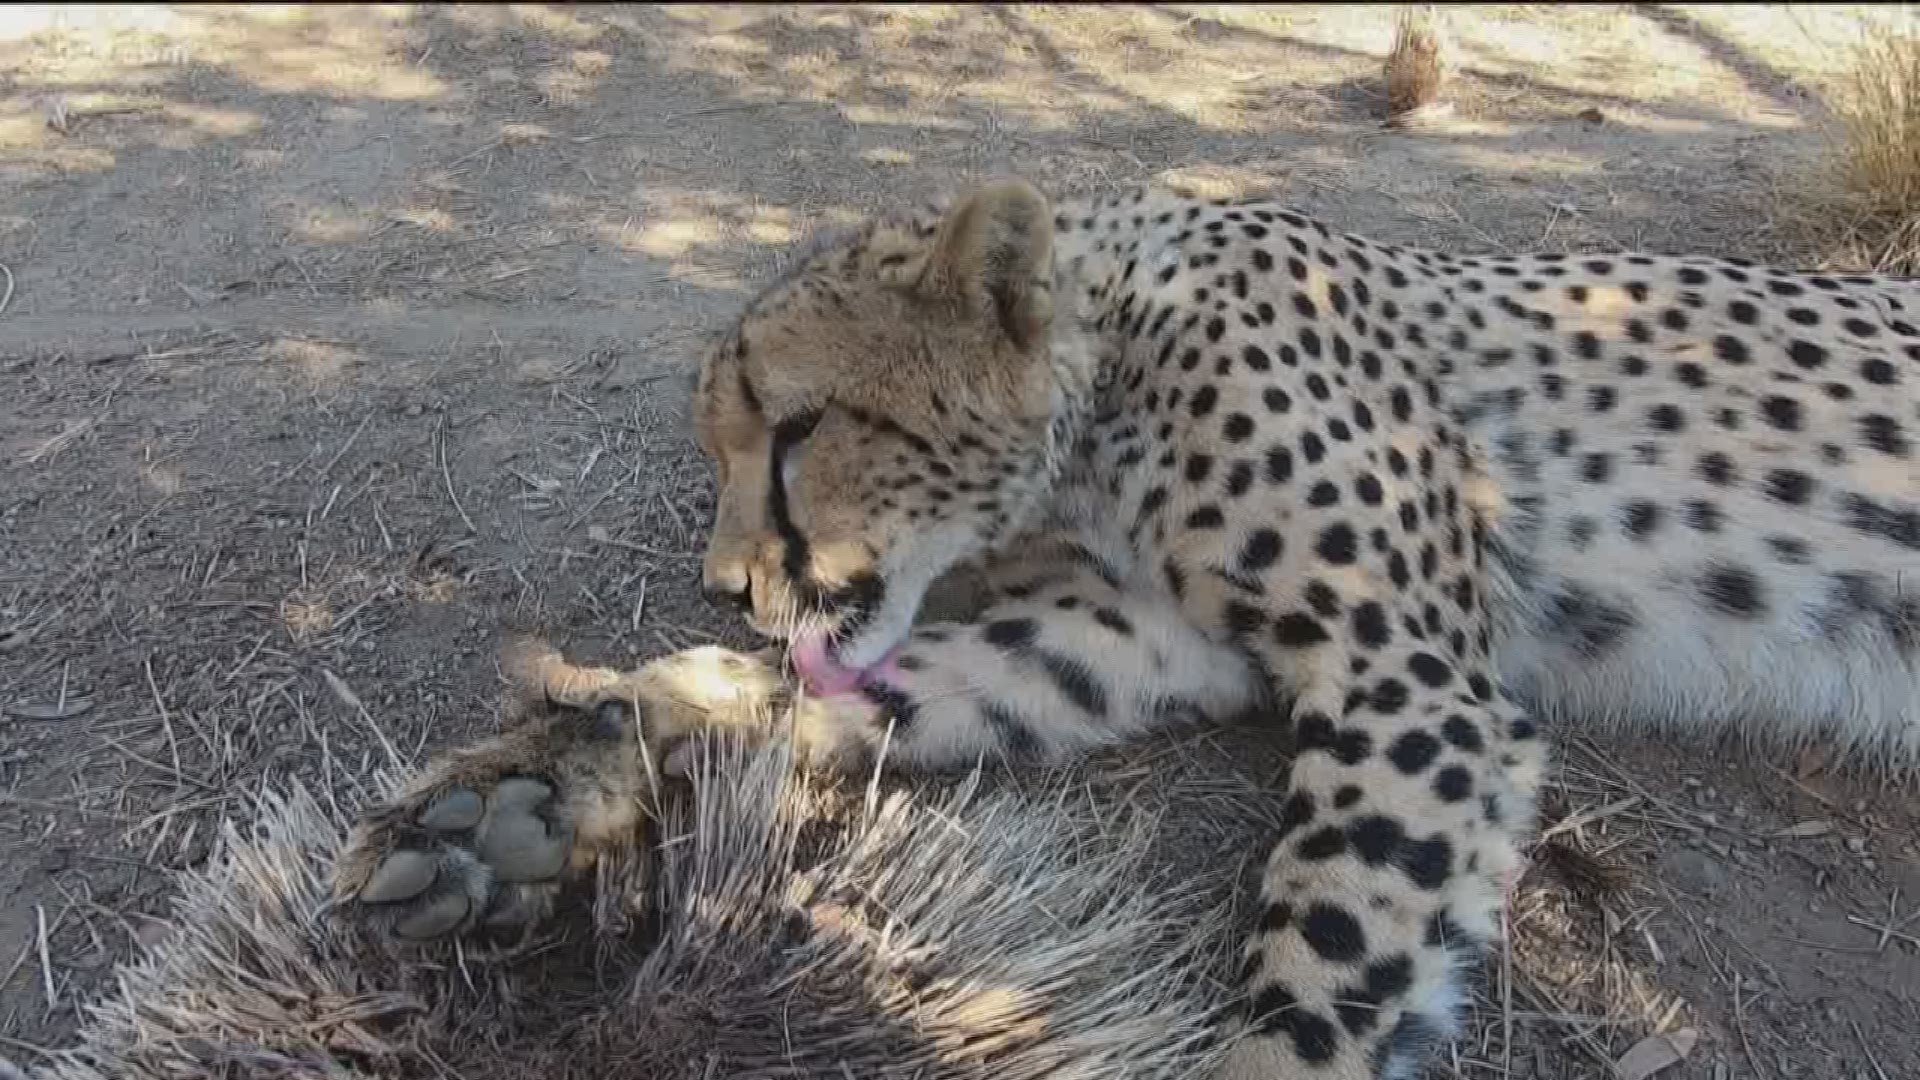 Visit wildwonders.org to learn how you can help these beautiful cheetahs.